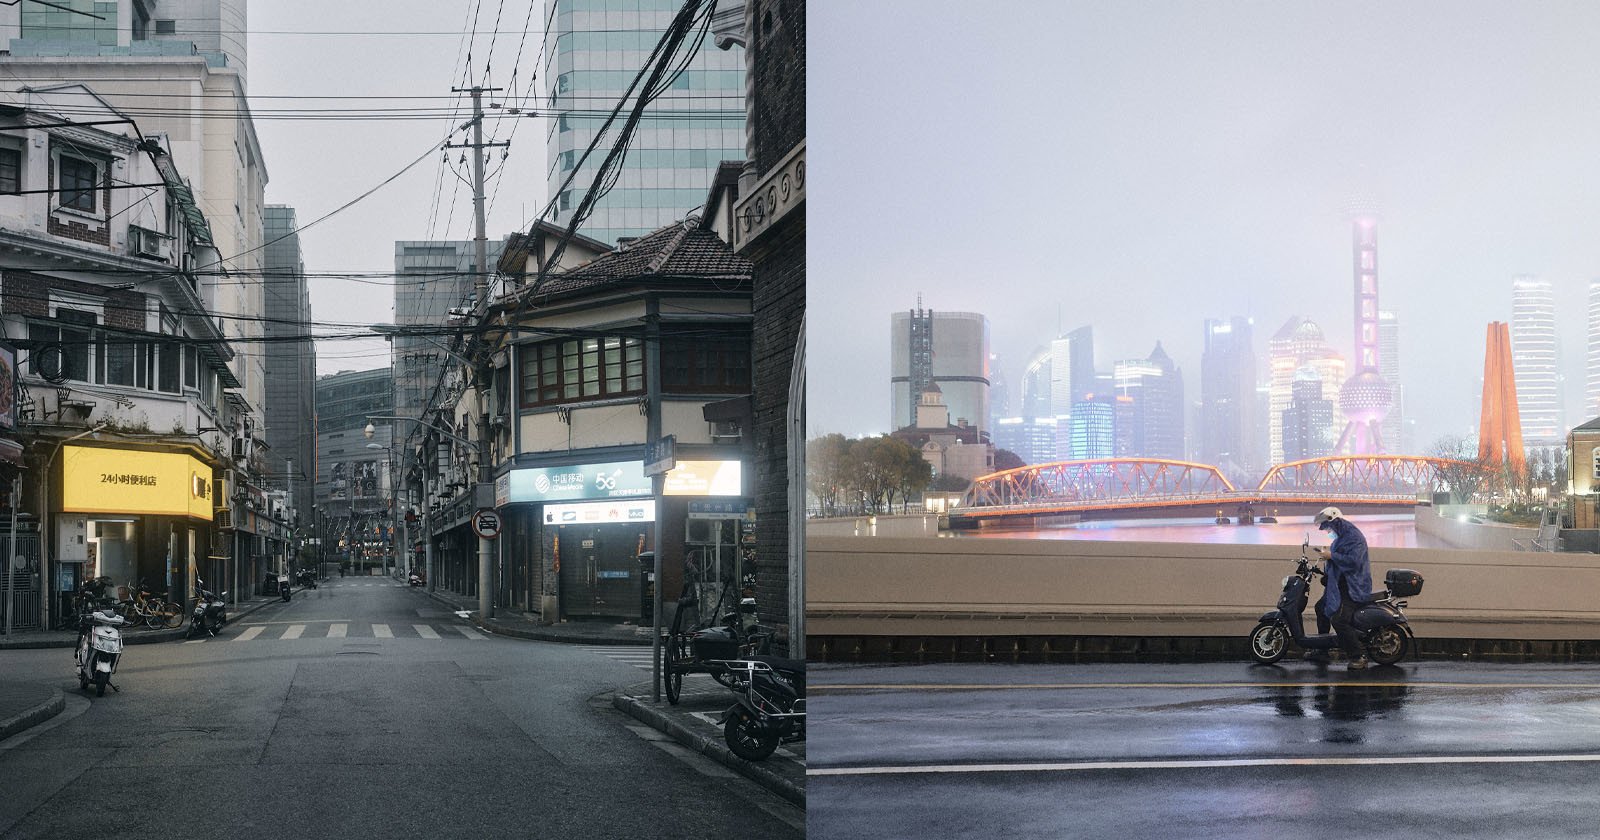  eerie pictures shanghai final days before its brutal 